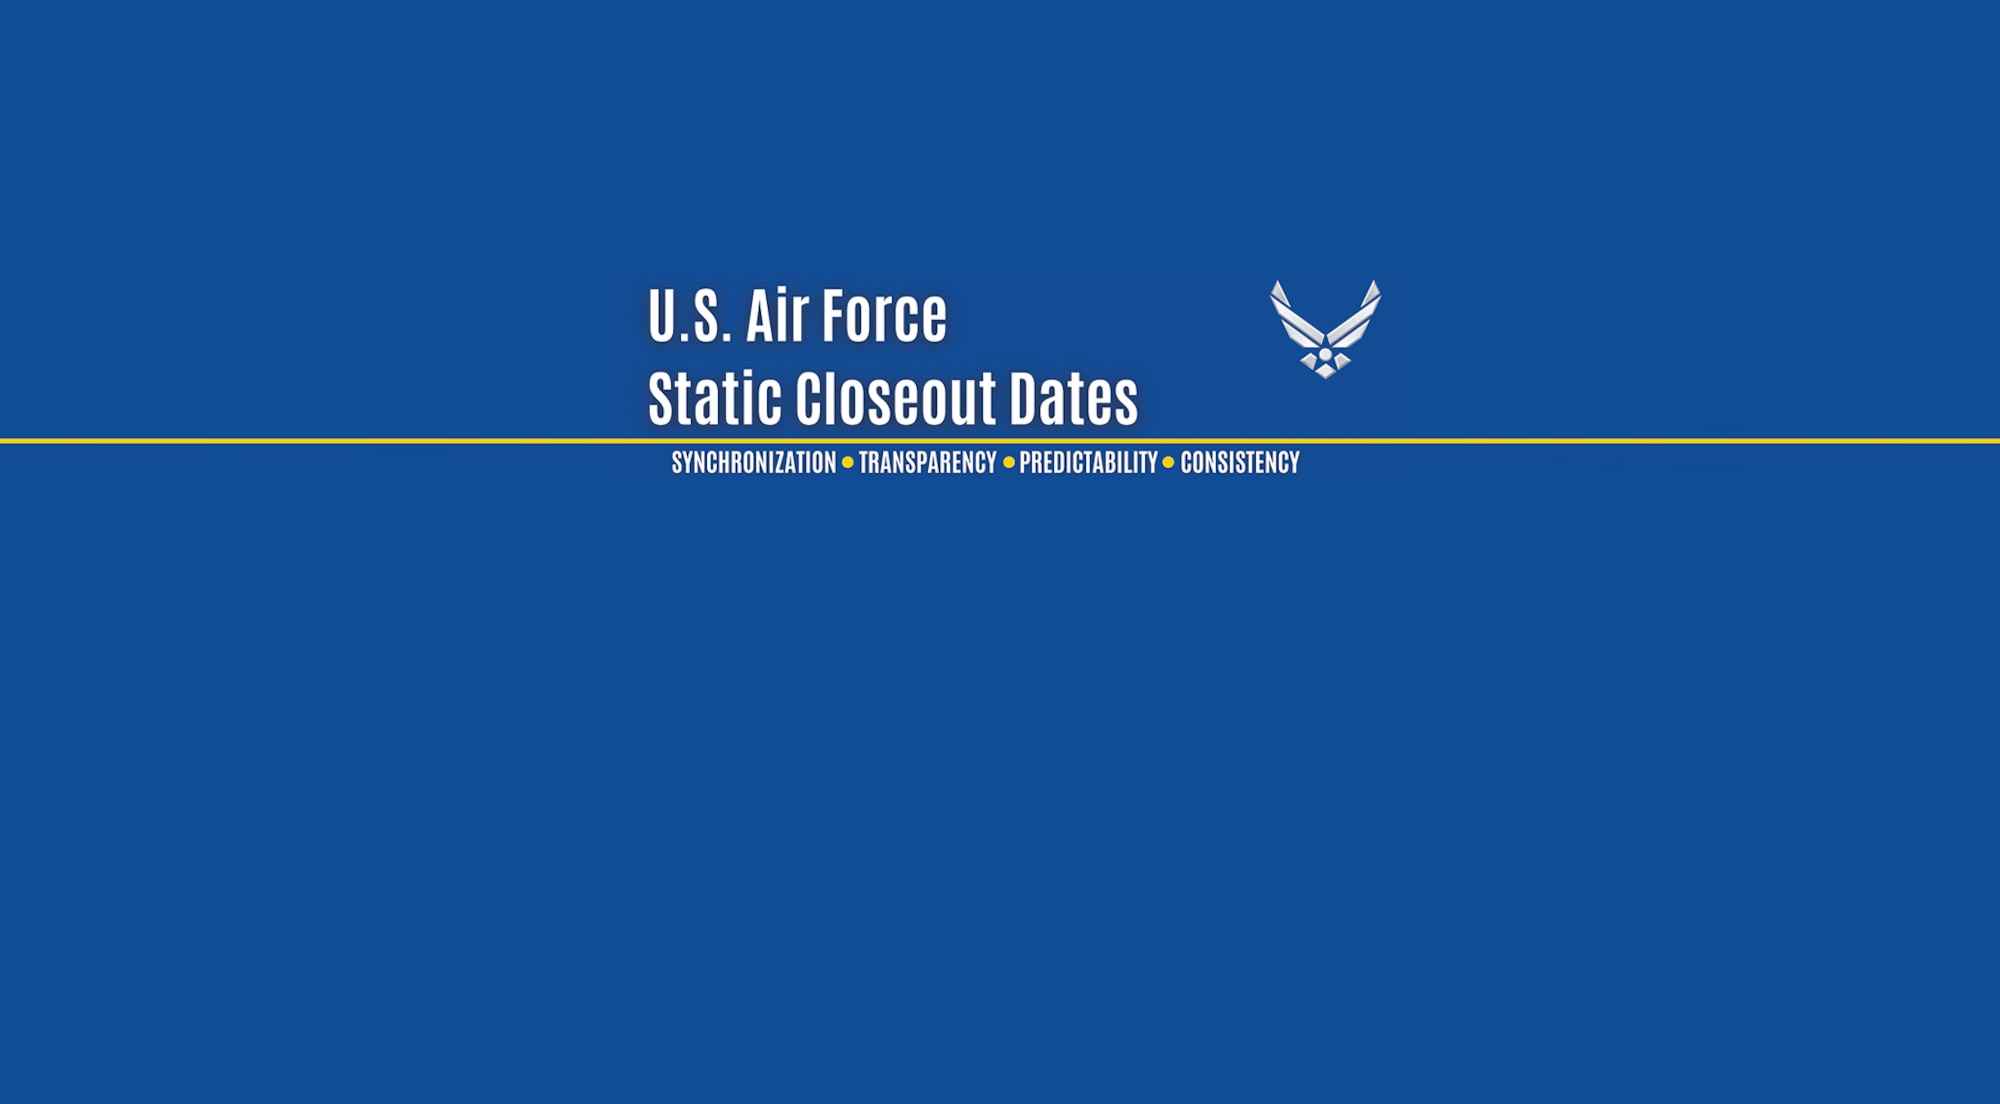 In developing solutions that best support the Air Force’s talent management strategy, transitioning from non-standardized annual and change of reporting official (CRO) OPR closeout policies to SCODs increases transparency by ensuring stable, steady, and reliable assessments from senior raters and rating chains. (Secretary of the Air Force Public Affairs graphic)